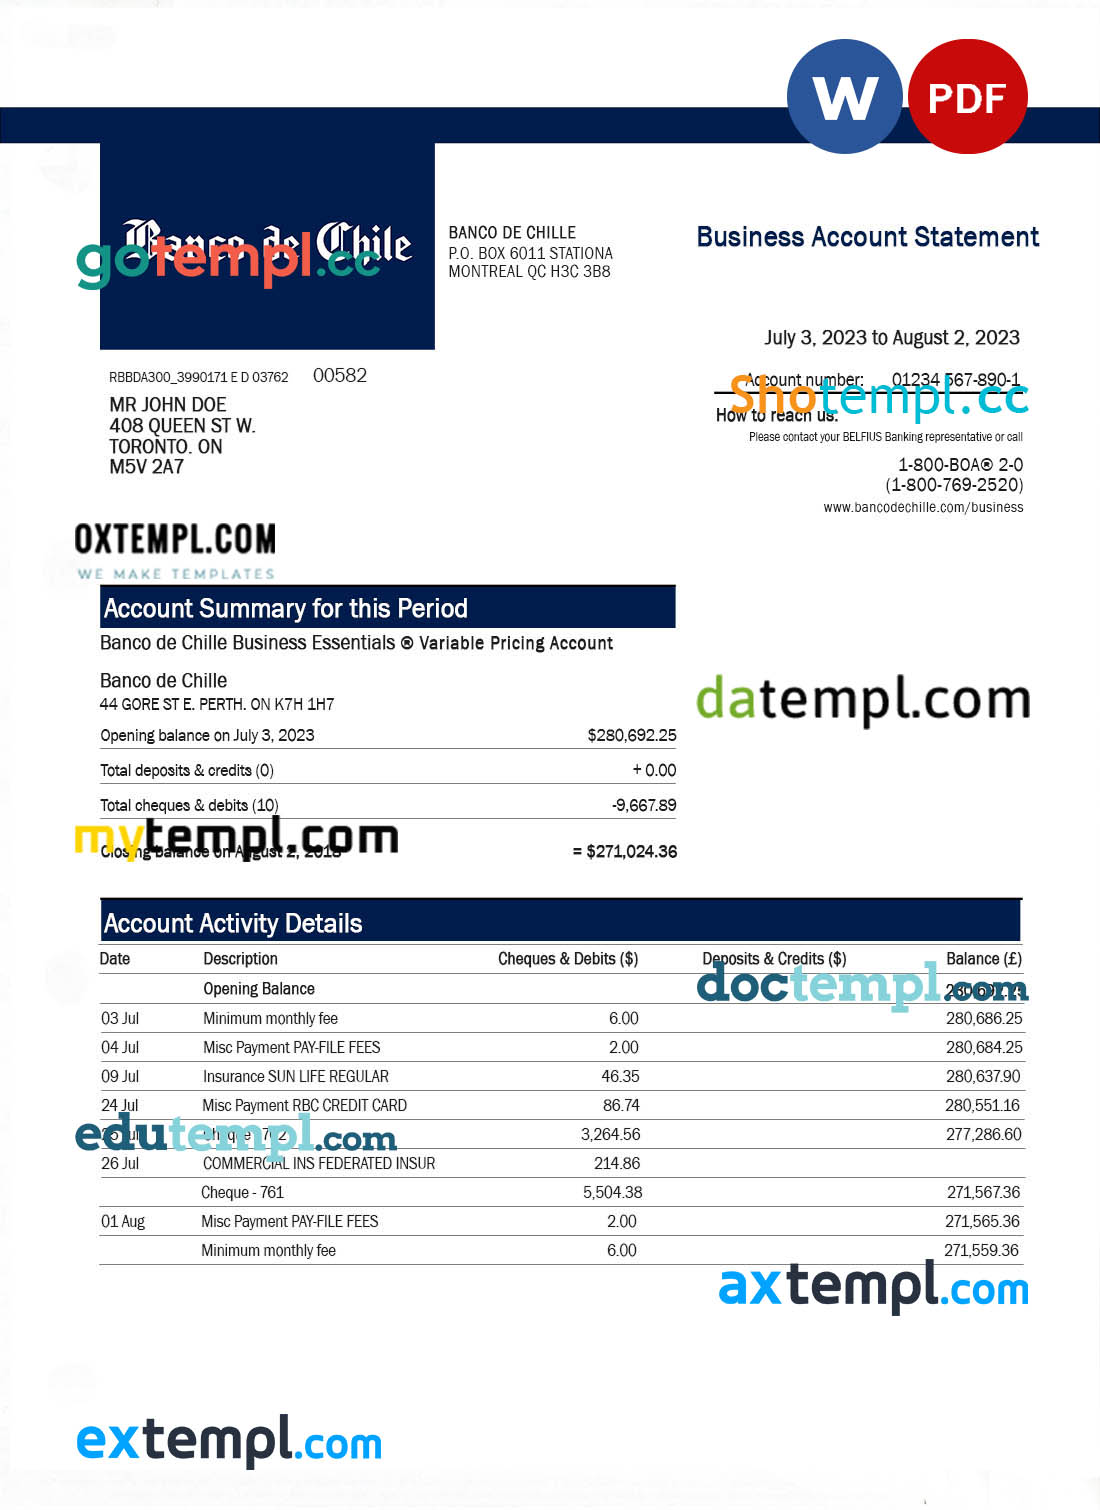 USA Denbury Resources Inc. oil & gas company pay stub Word and PDF template